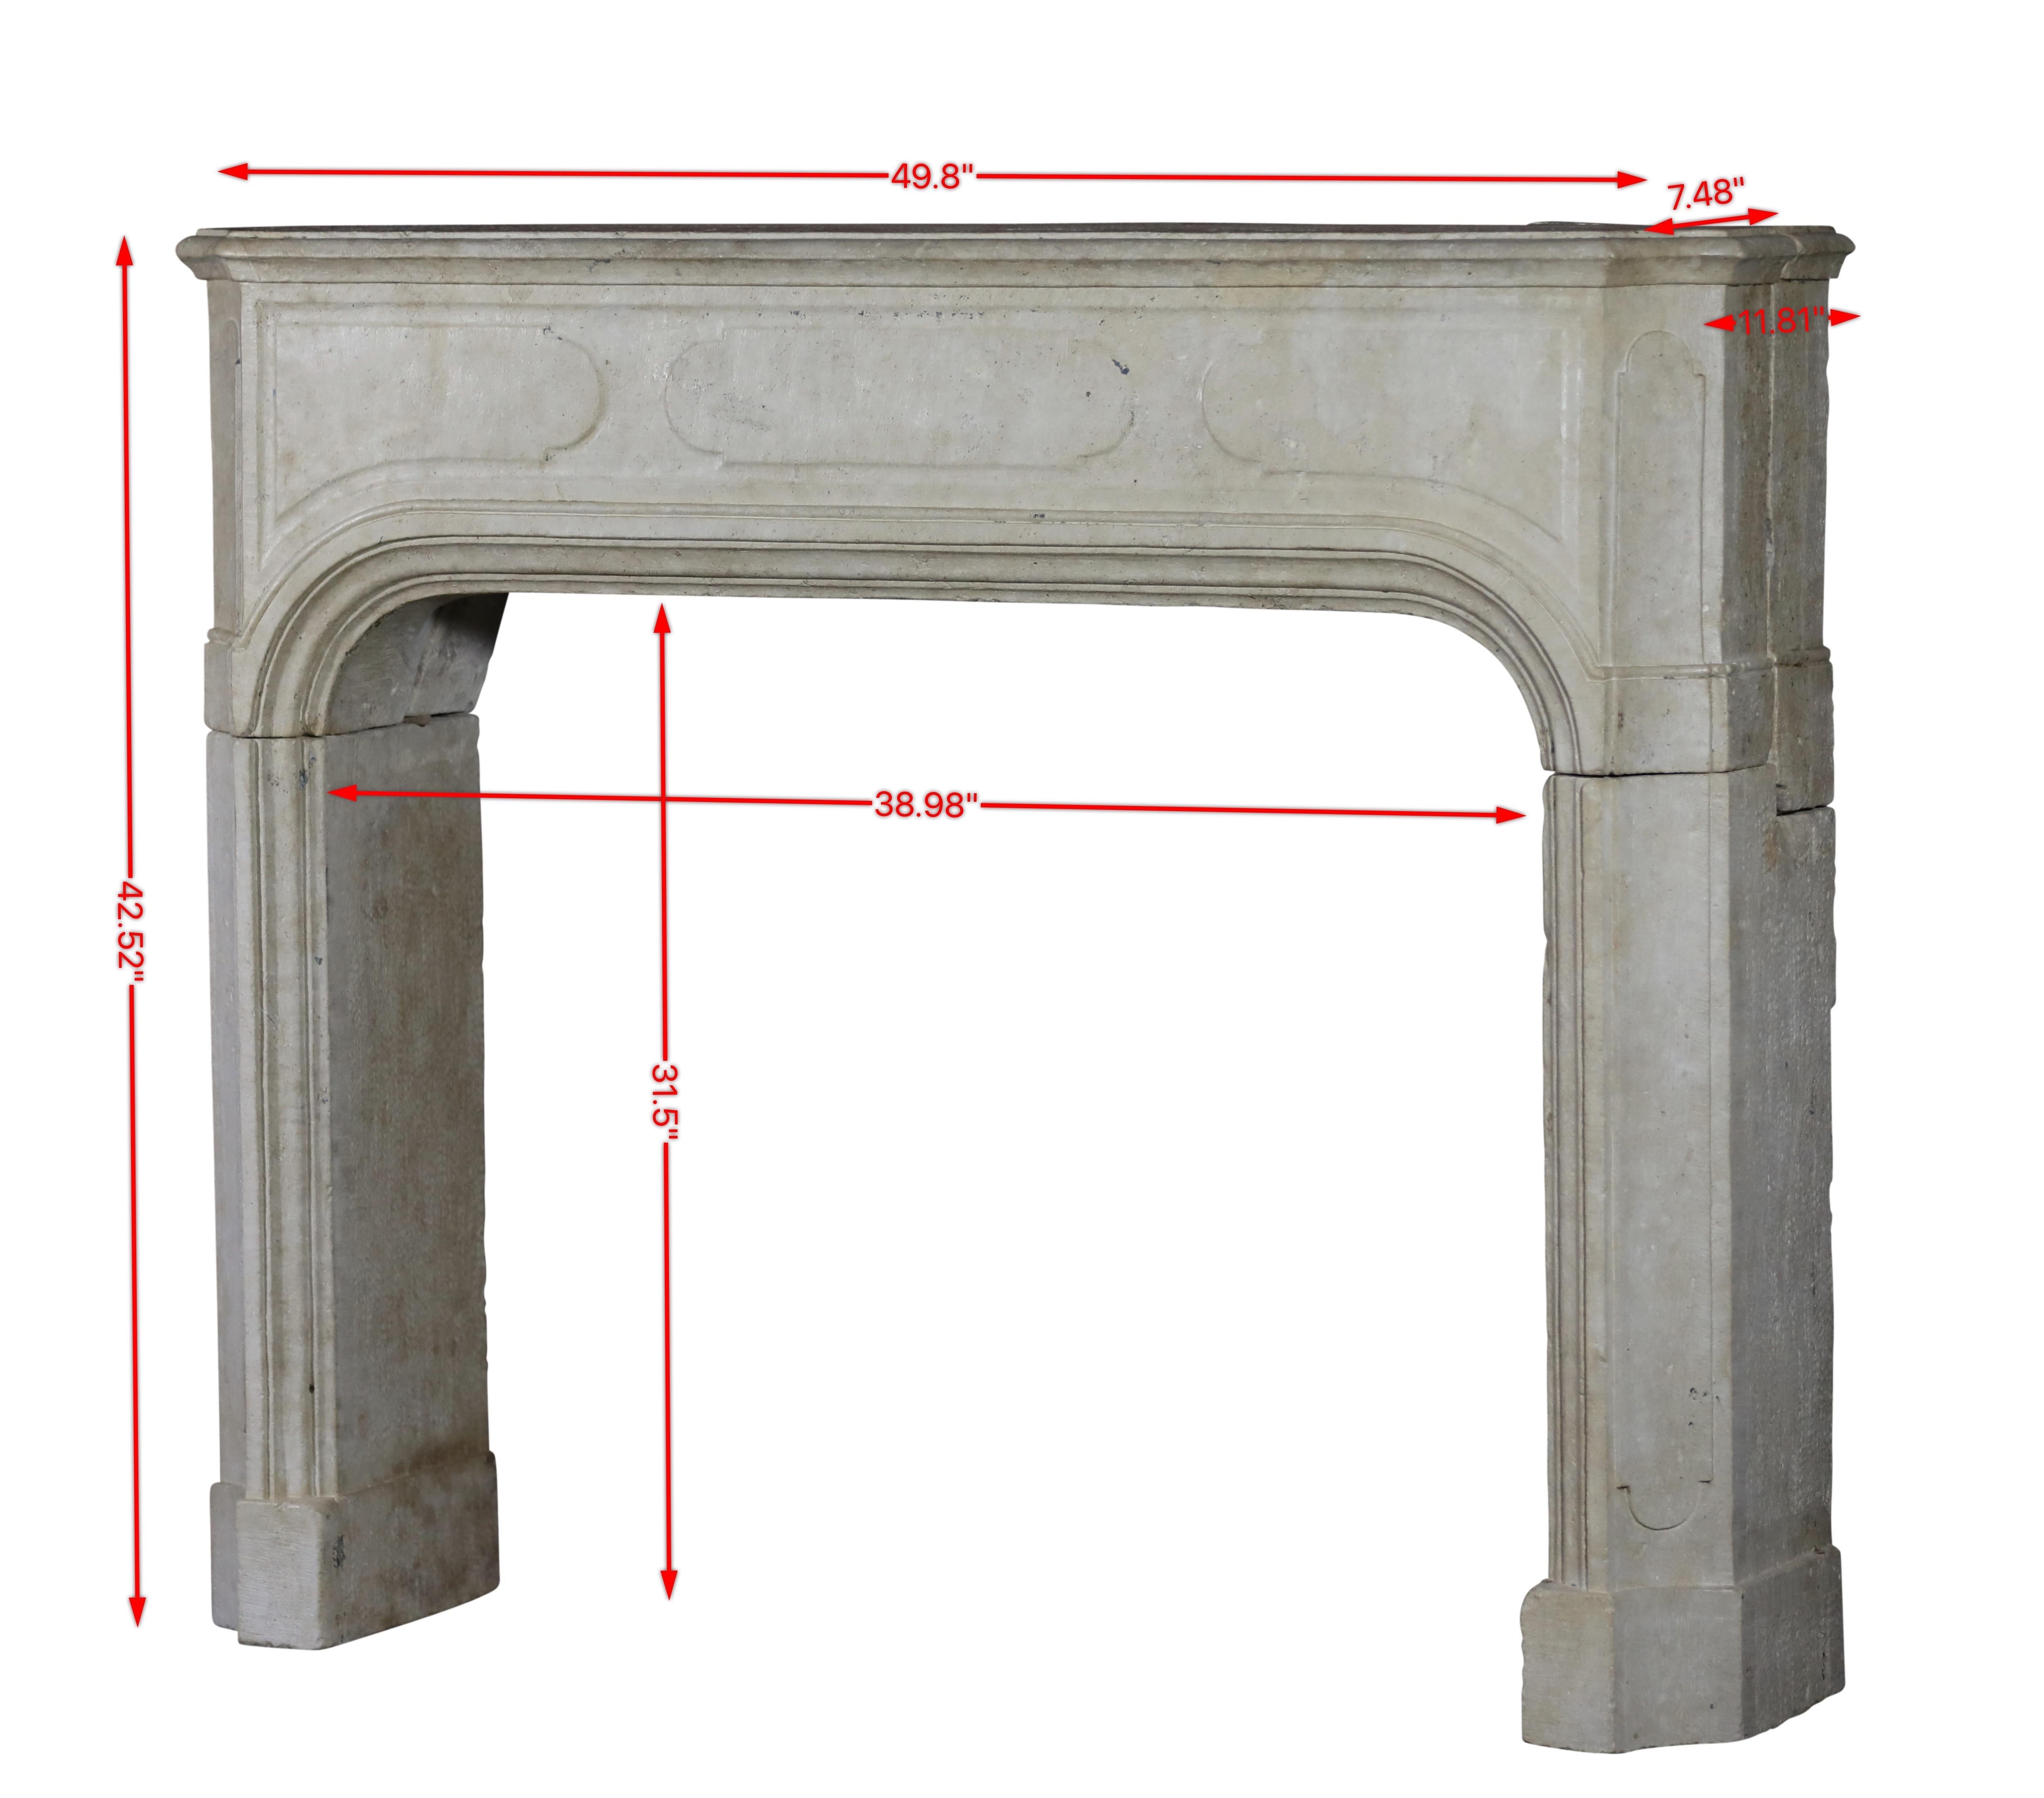 Louis XIV period limestone fireplace surround with great wear and extra small proportions.
The perfect fireplace for original apartment decoration.
This 18th century period piece is rare and in great condition.
Measurements:
126,5 cm Exterior Width